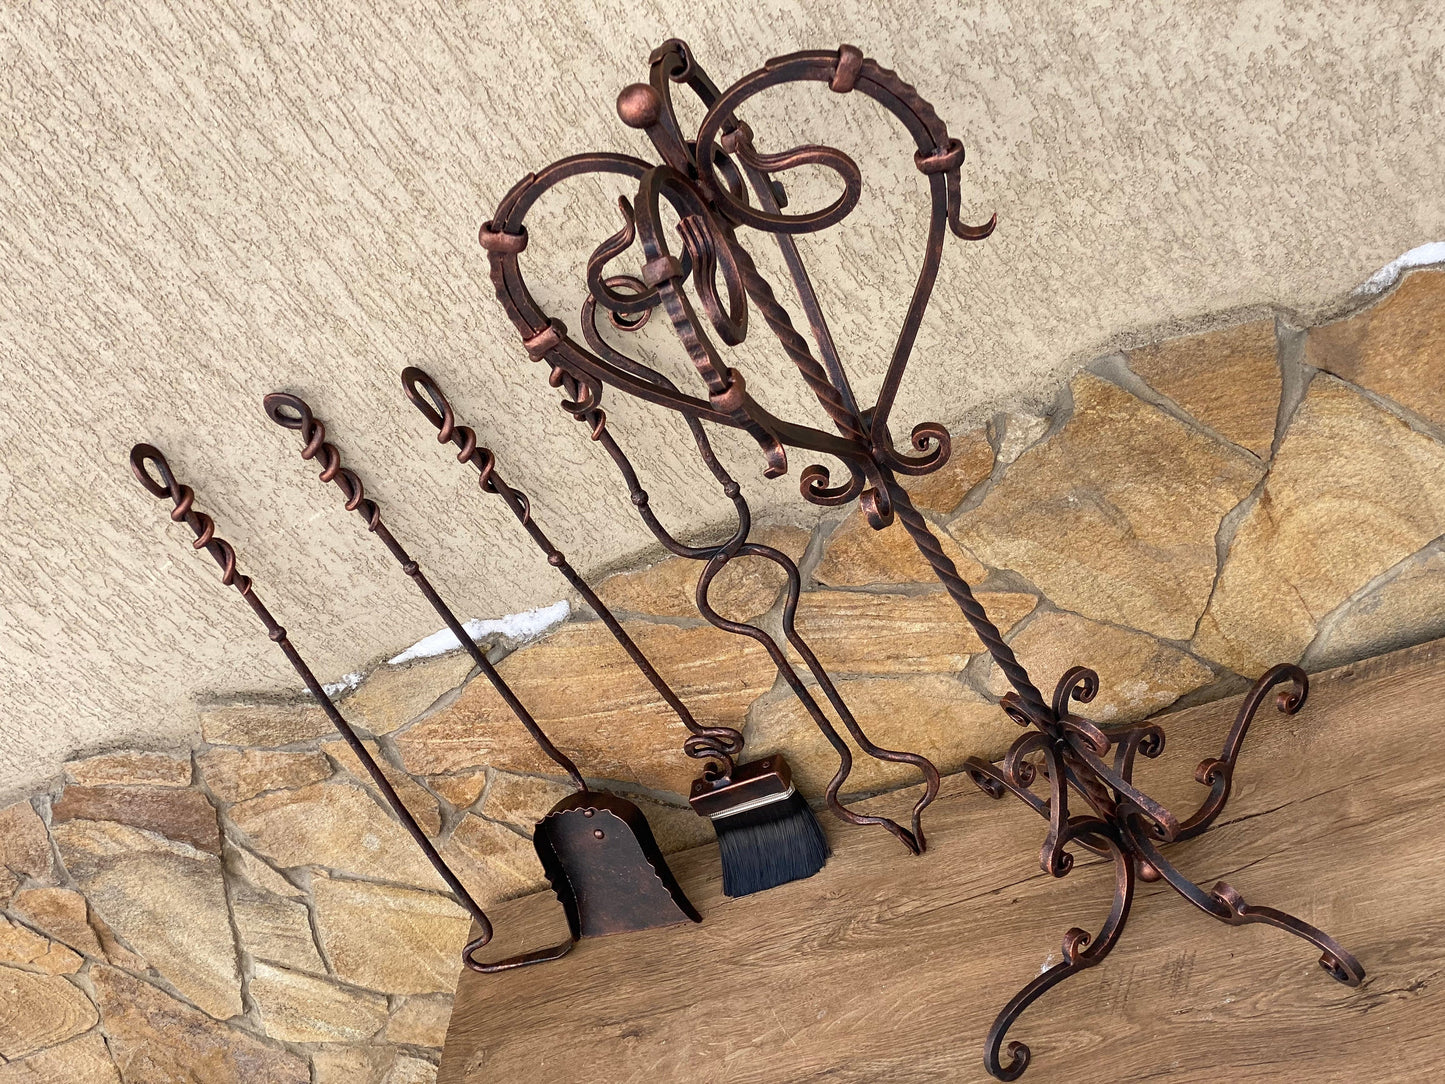 Fireplace tools, fireplace, fire poker, firewood holder, iron gift, birthday, anniversary,Christmas,gift for dad,graduation gift,Fathers Day